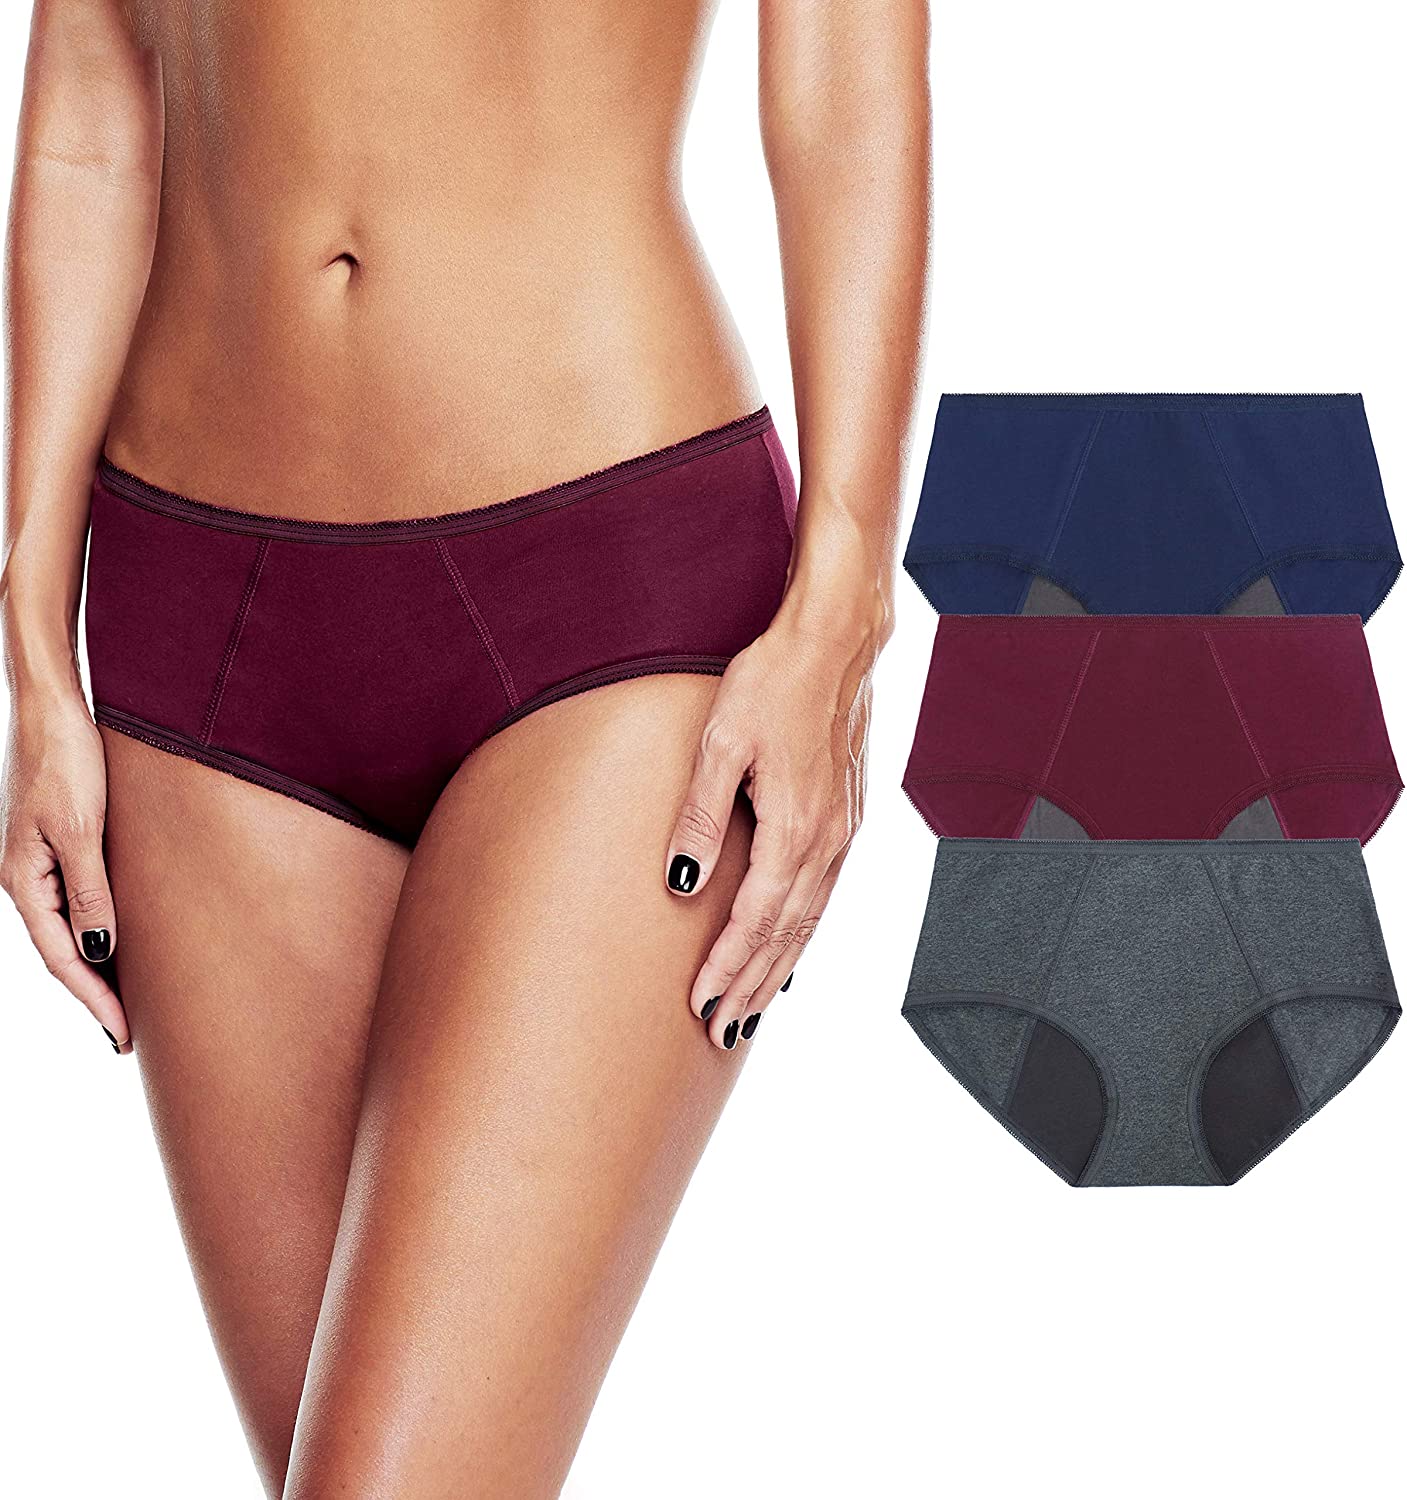 Do Leak-Proof Period Panties Really Work? I Found Out